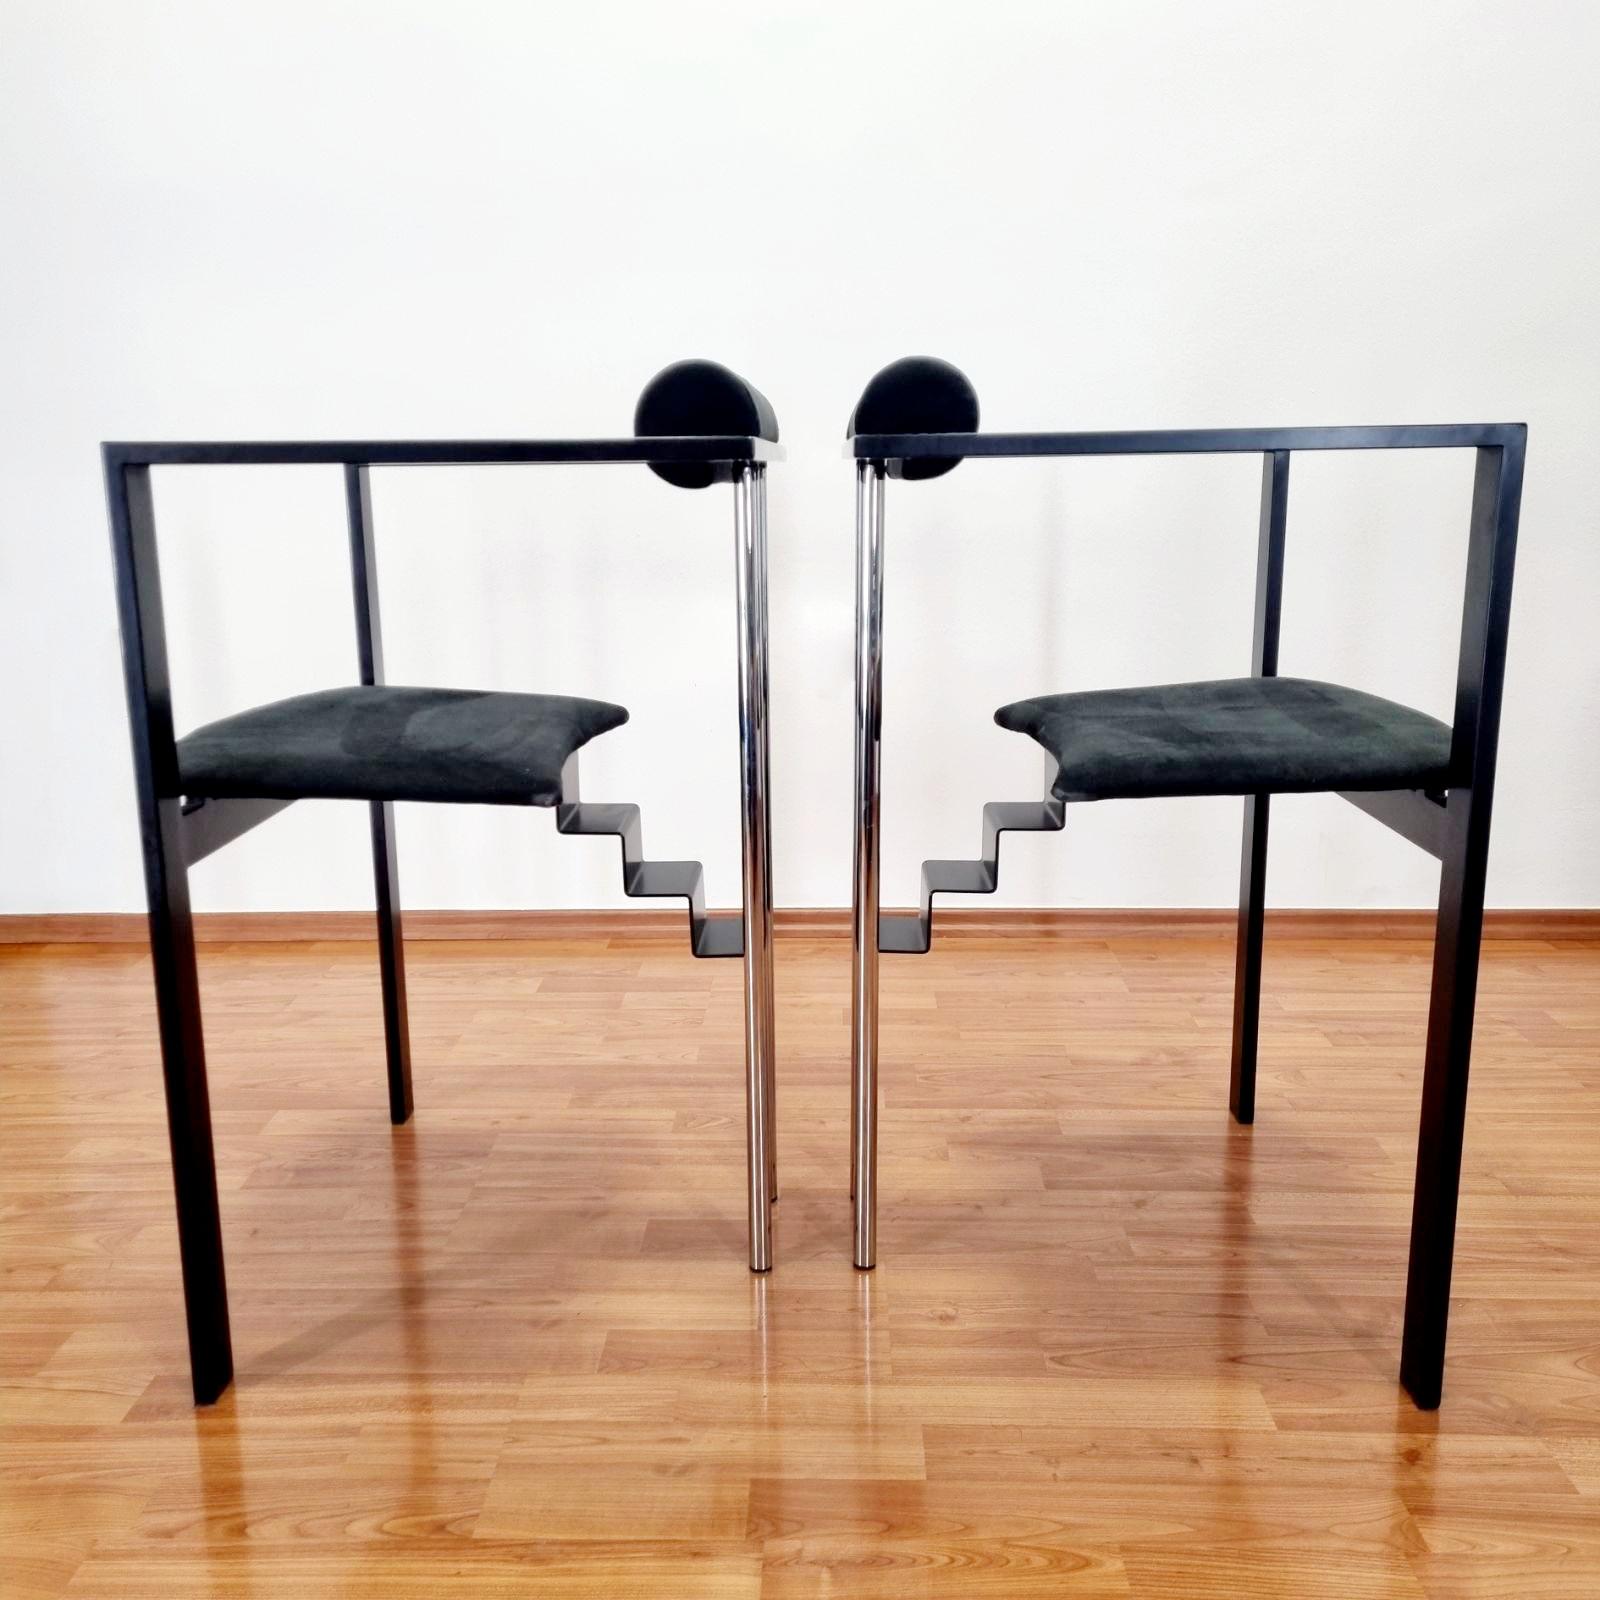 Post-Modern Postmodern Trix Armchairs by K.F. Forster for KFF Design, Germany 80s, Set of 4 For Sale